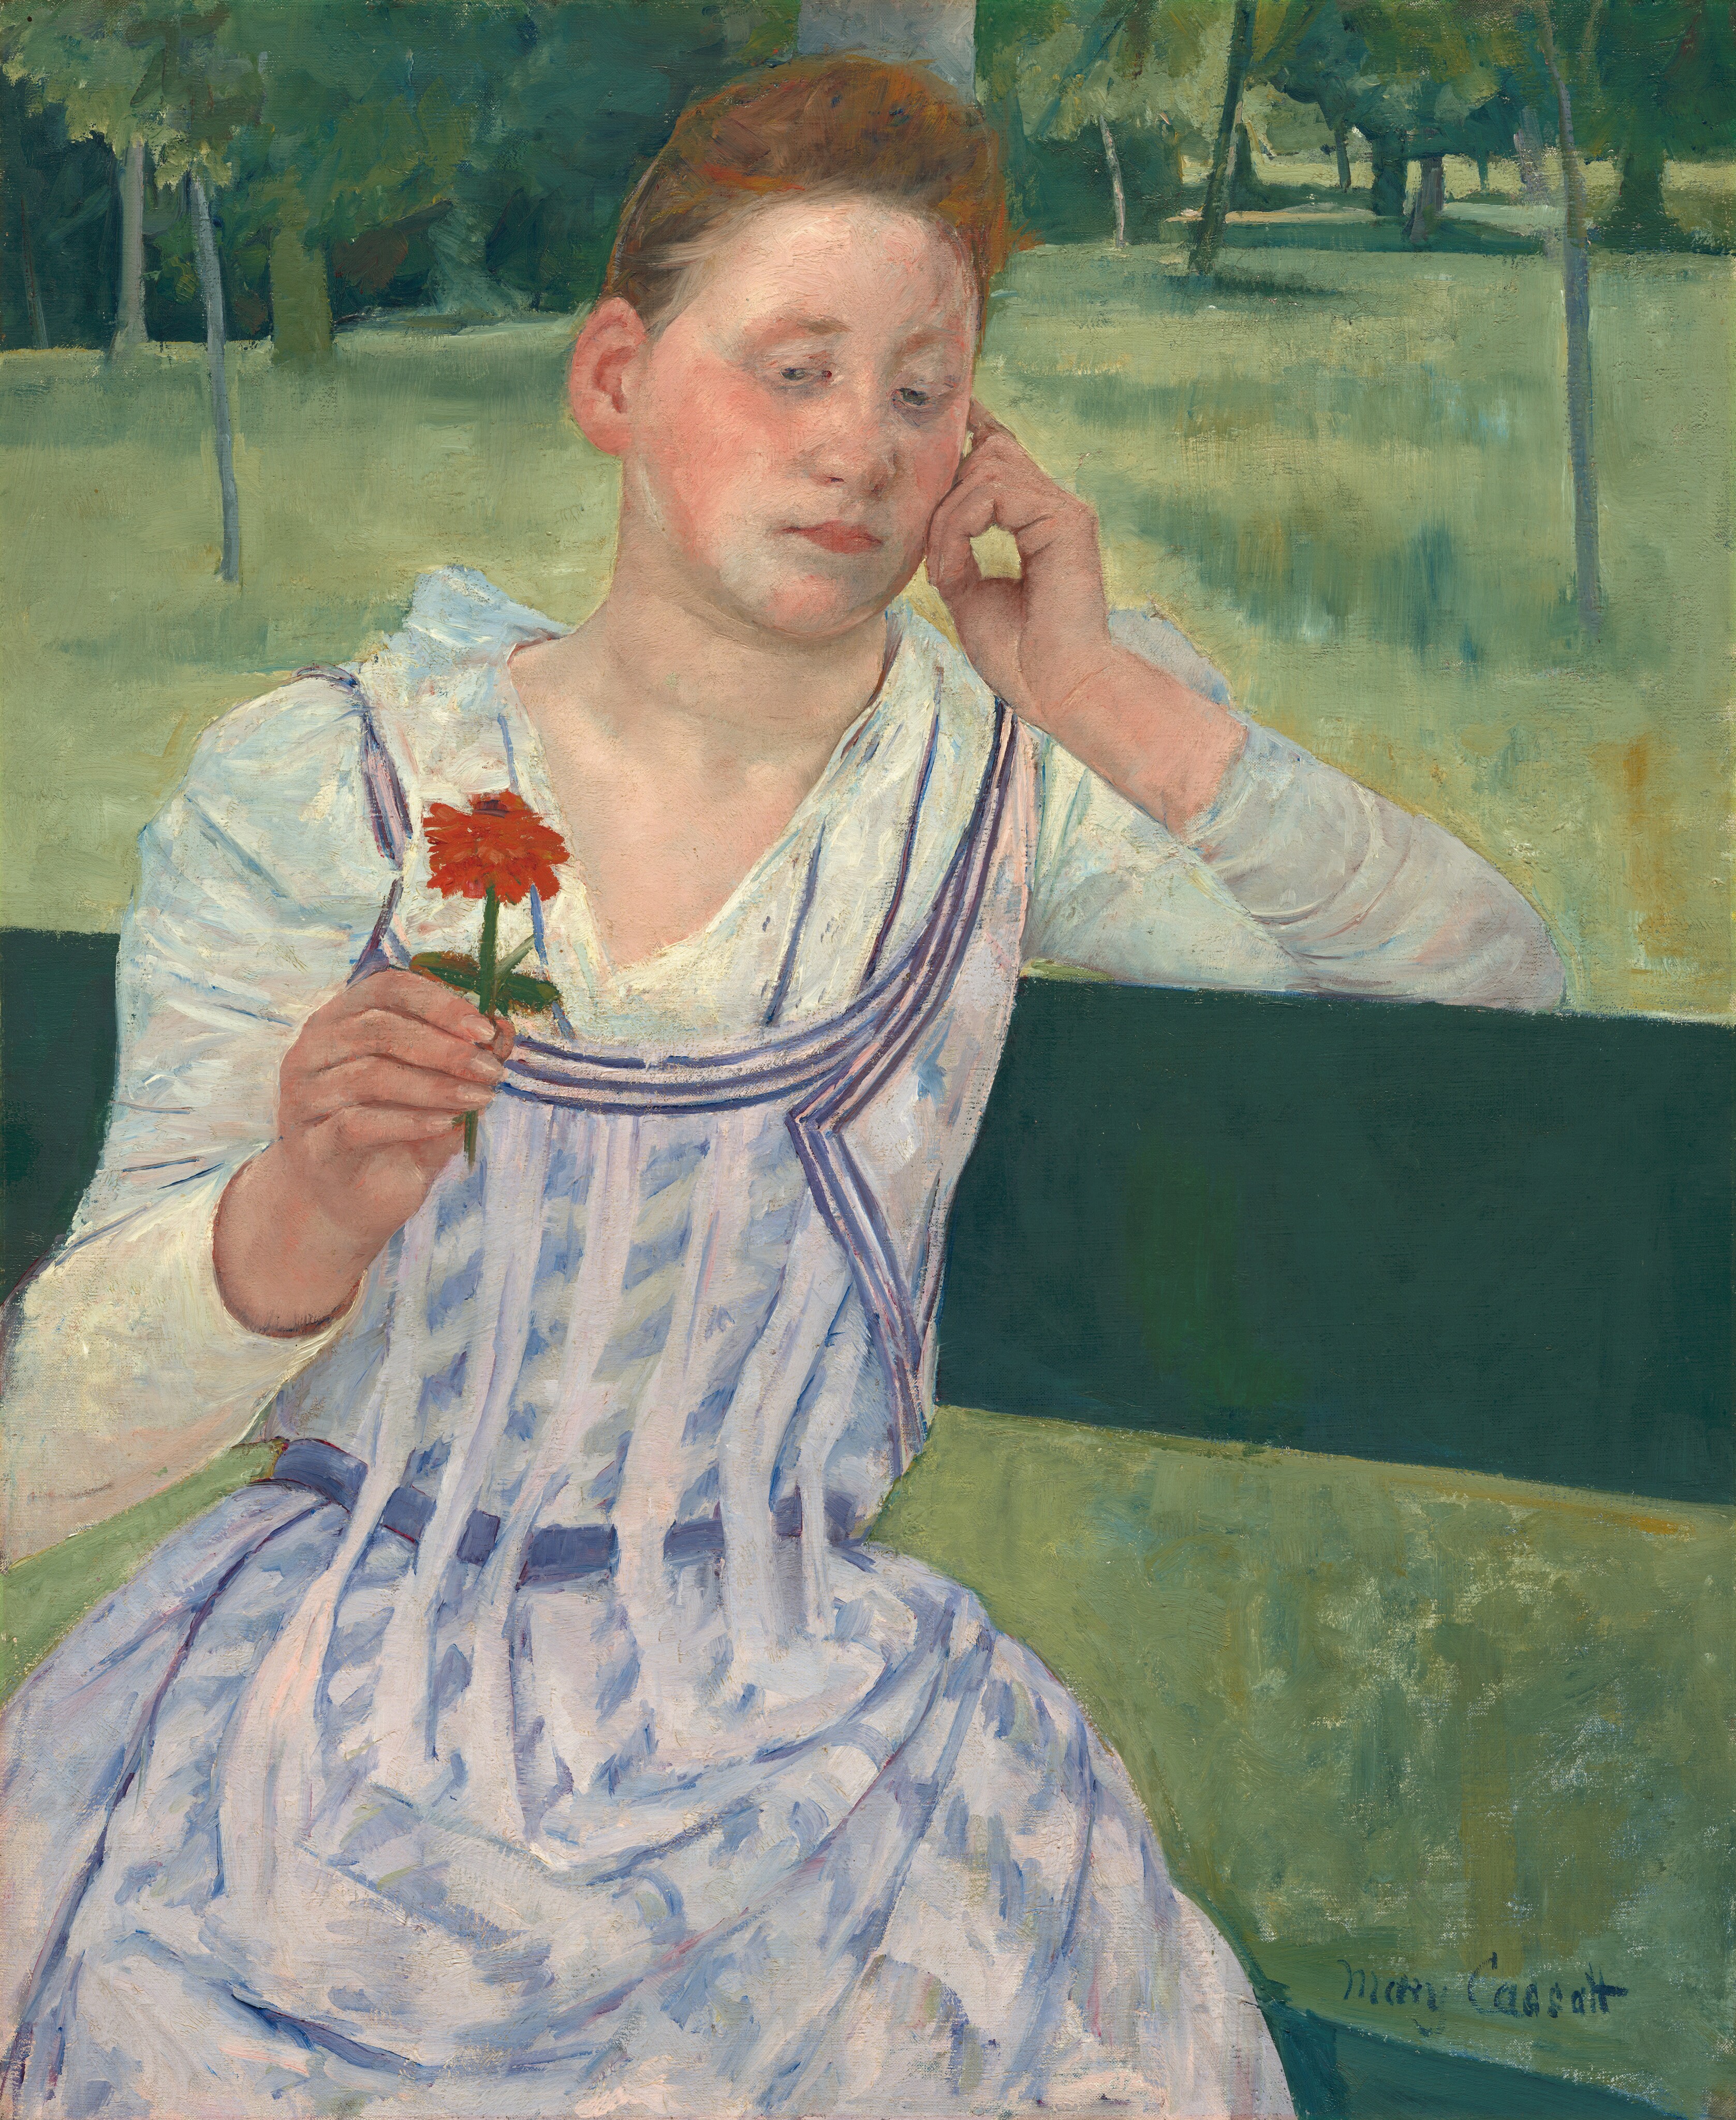 Woman with a Red Zinnia by Mary Cassatt - 1891 - 73.6 x 60.3 cm National Gallery of Art